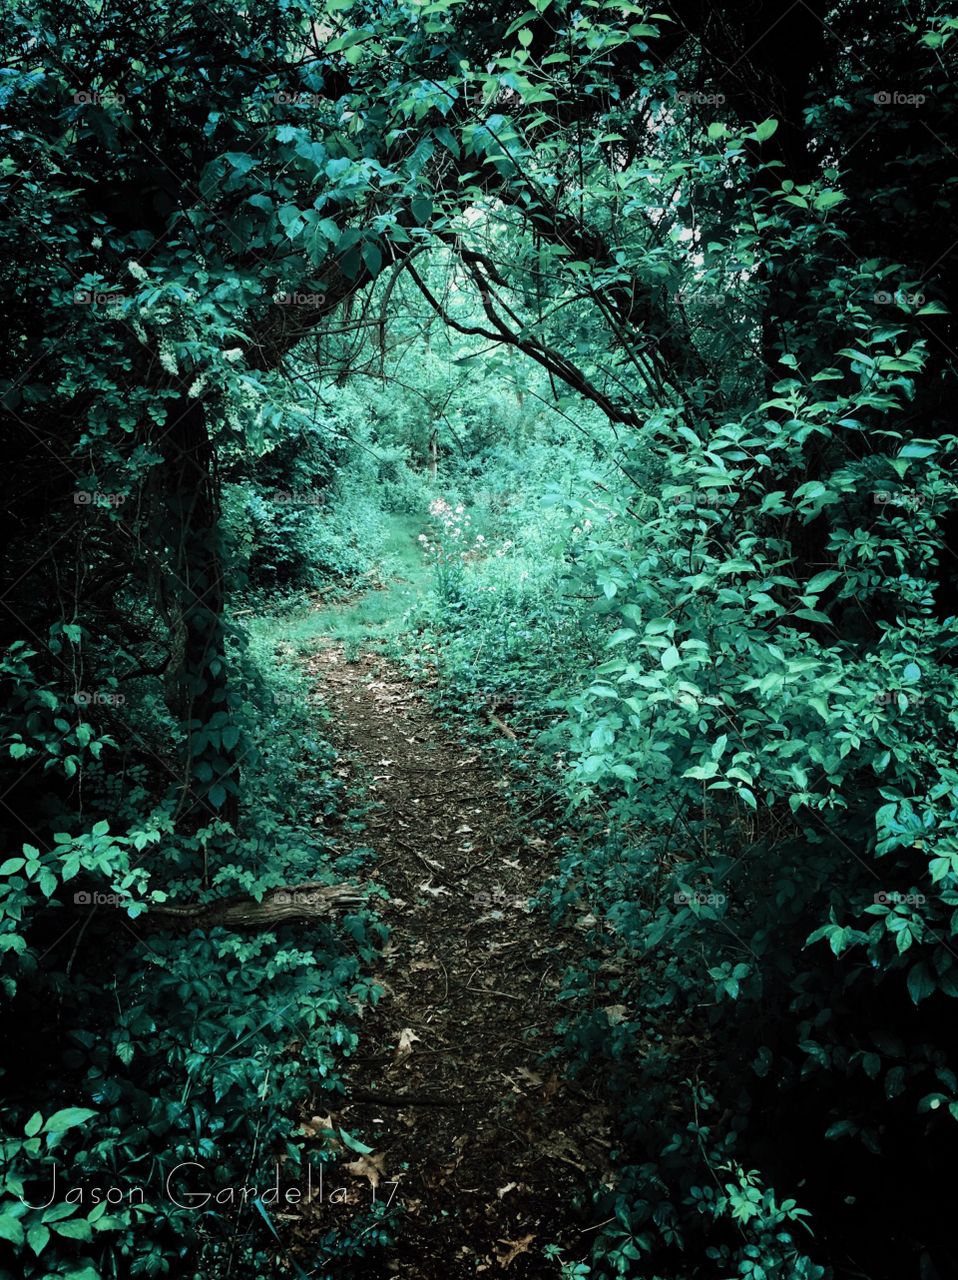 Through trails of green